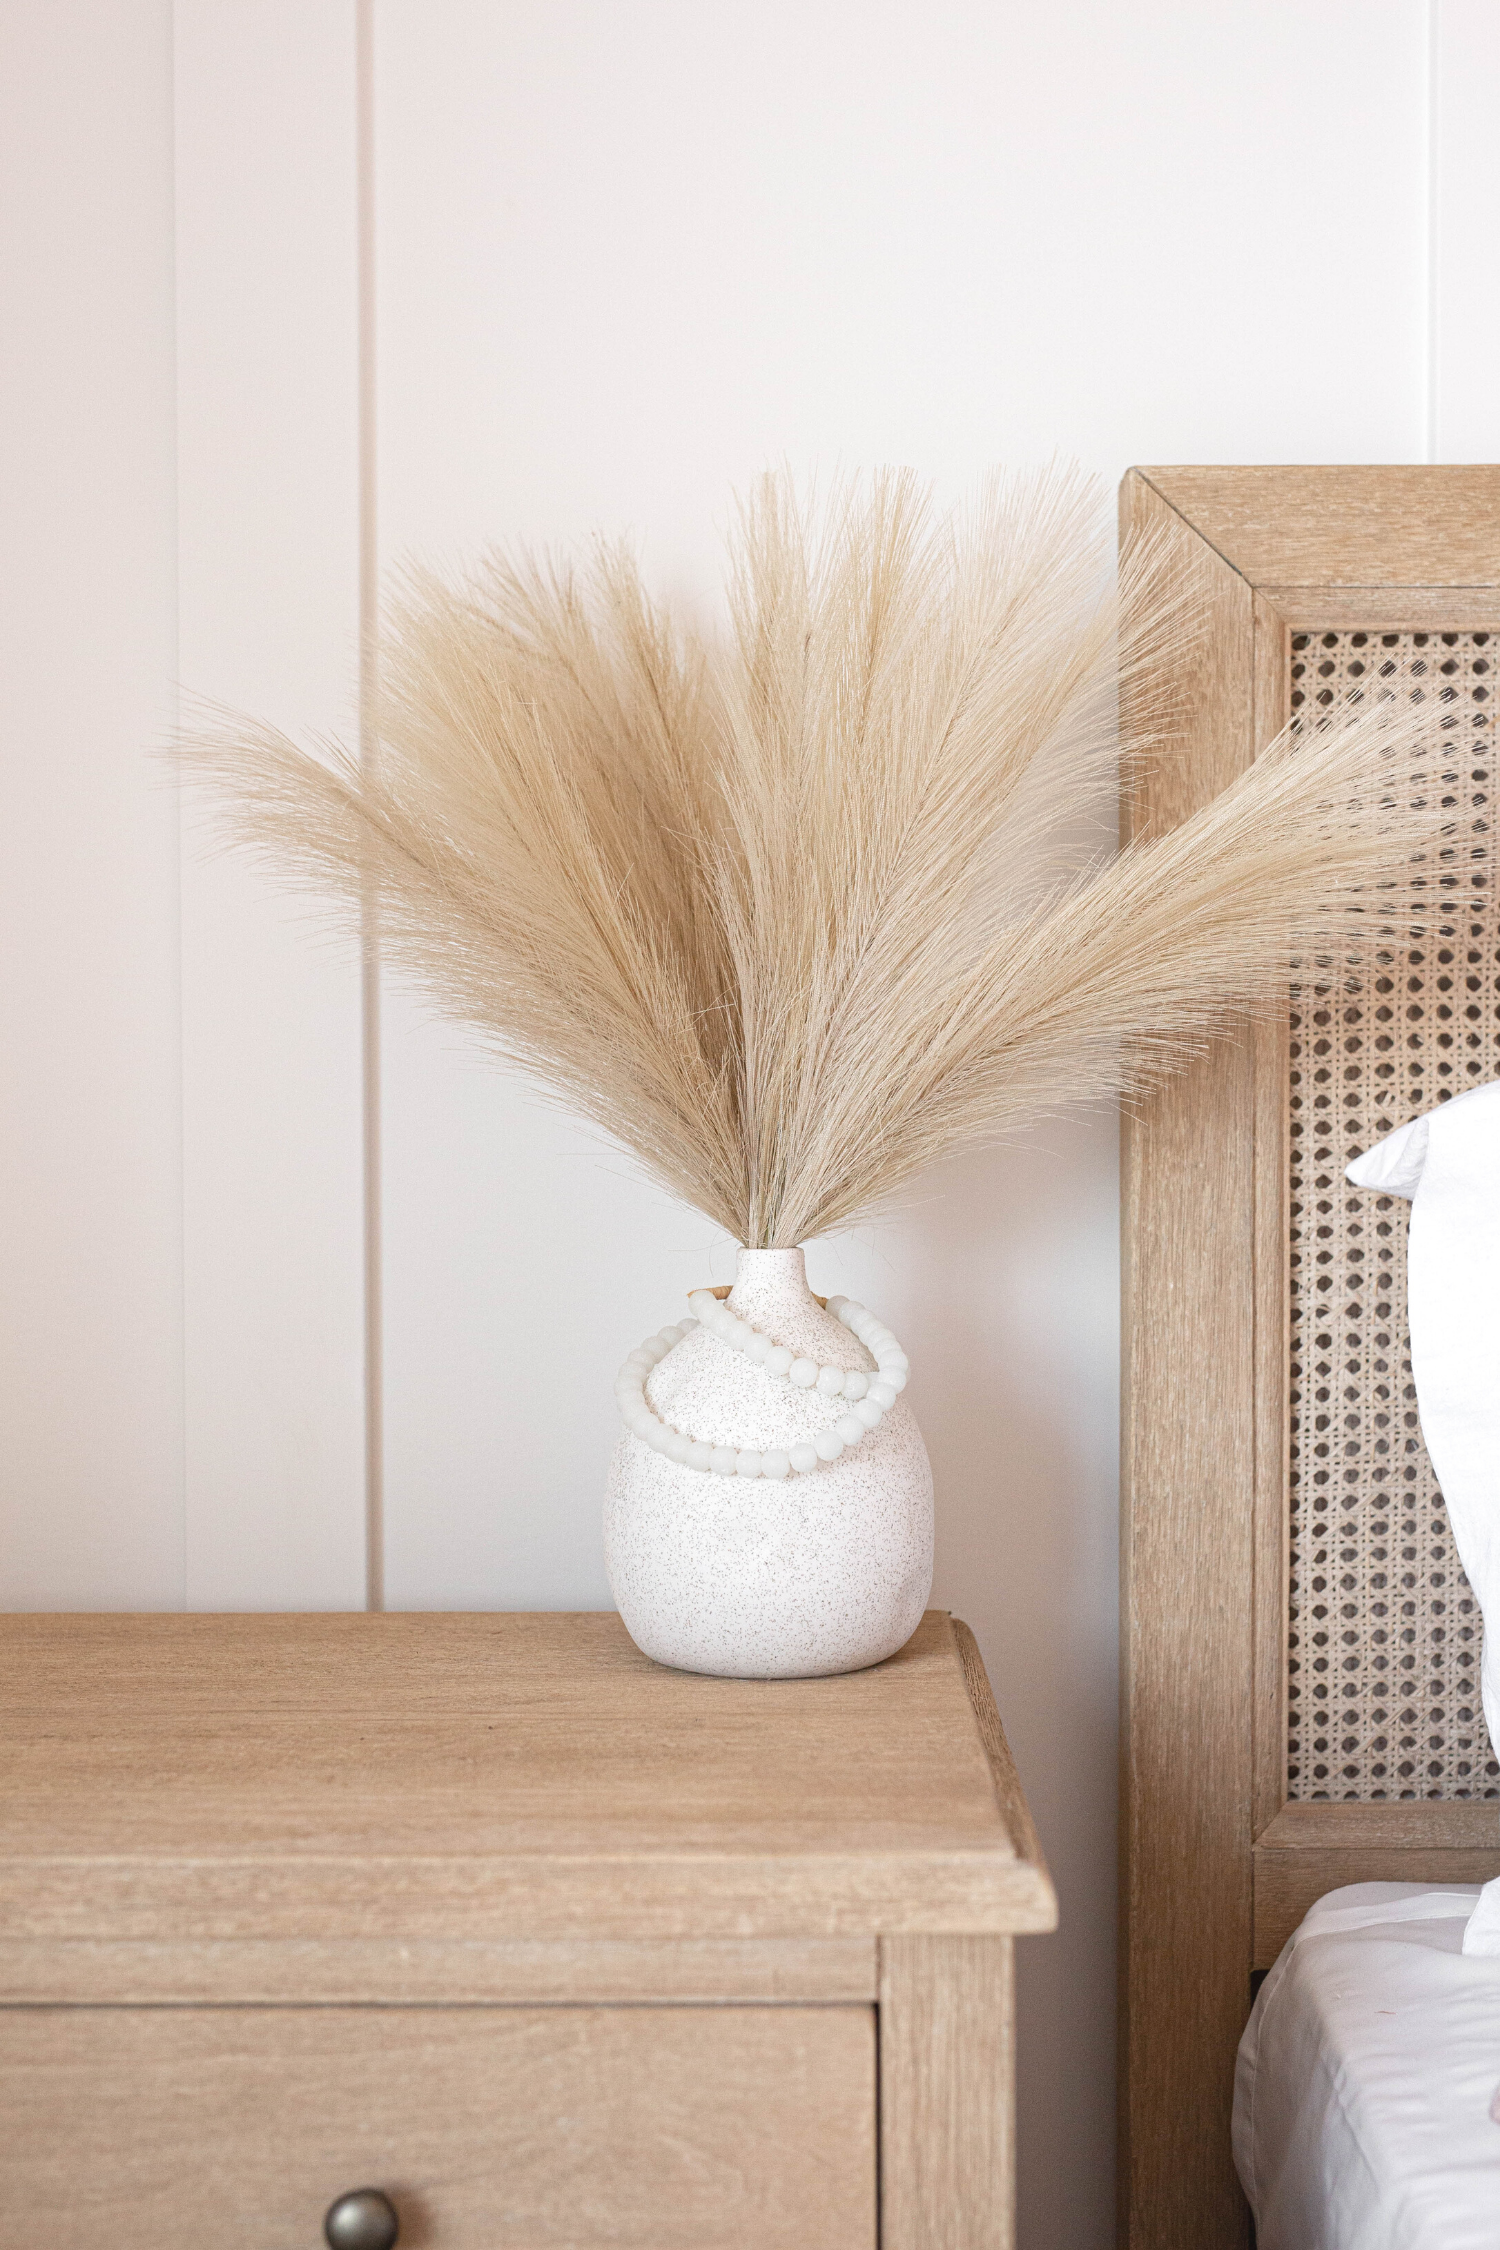 Luxe B "Faux" Accent Artificial Pampas Grass in Taupe Sand + Mojave Vase Promo Pack - Luxe B Pampas Grass  Canada , dried flowers and pampas grass Canadian Company. Bulk and wholesale dried flowers and pampas grass fluffy. Large White Pampas Grass Toronto